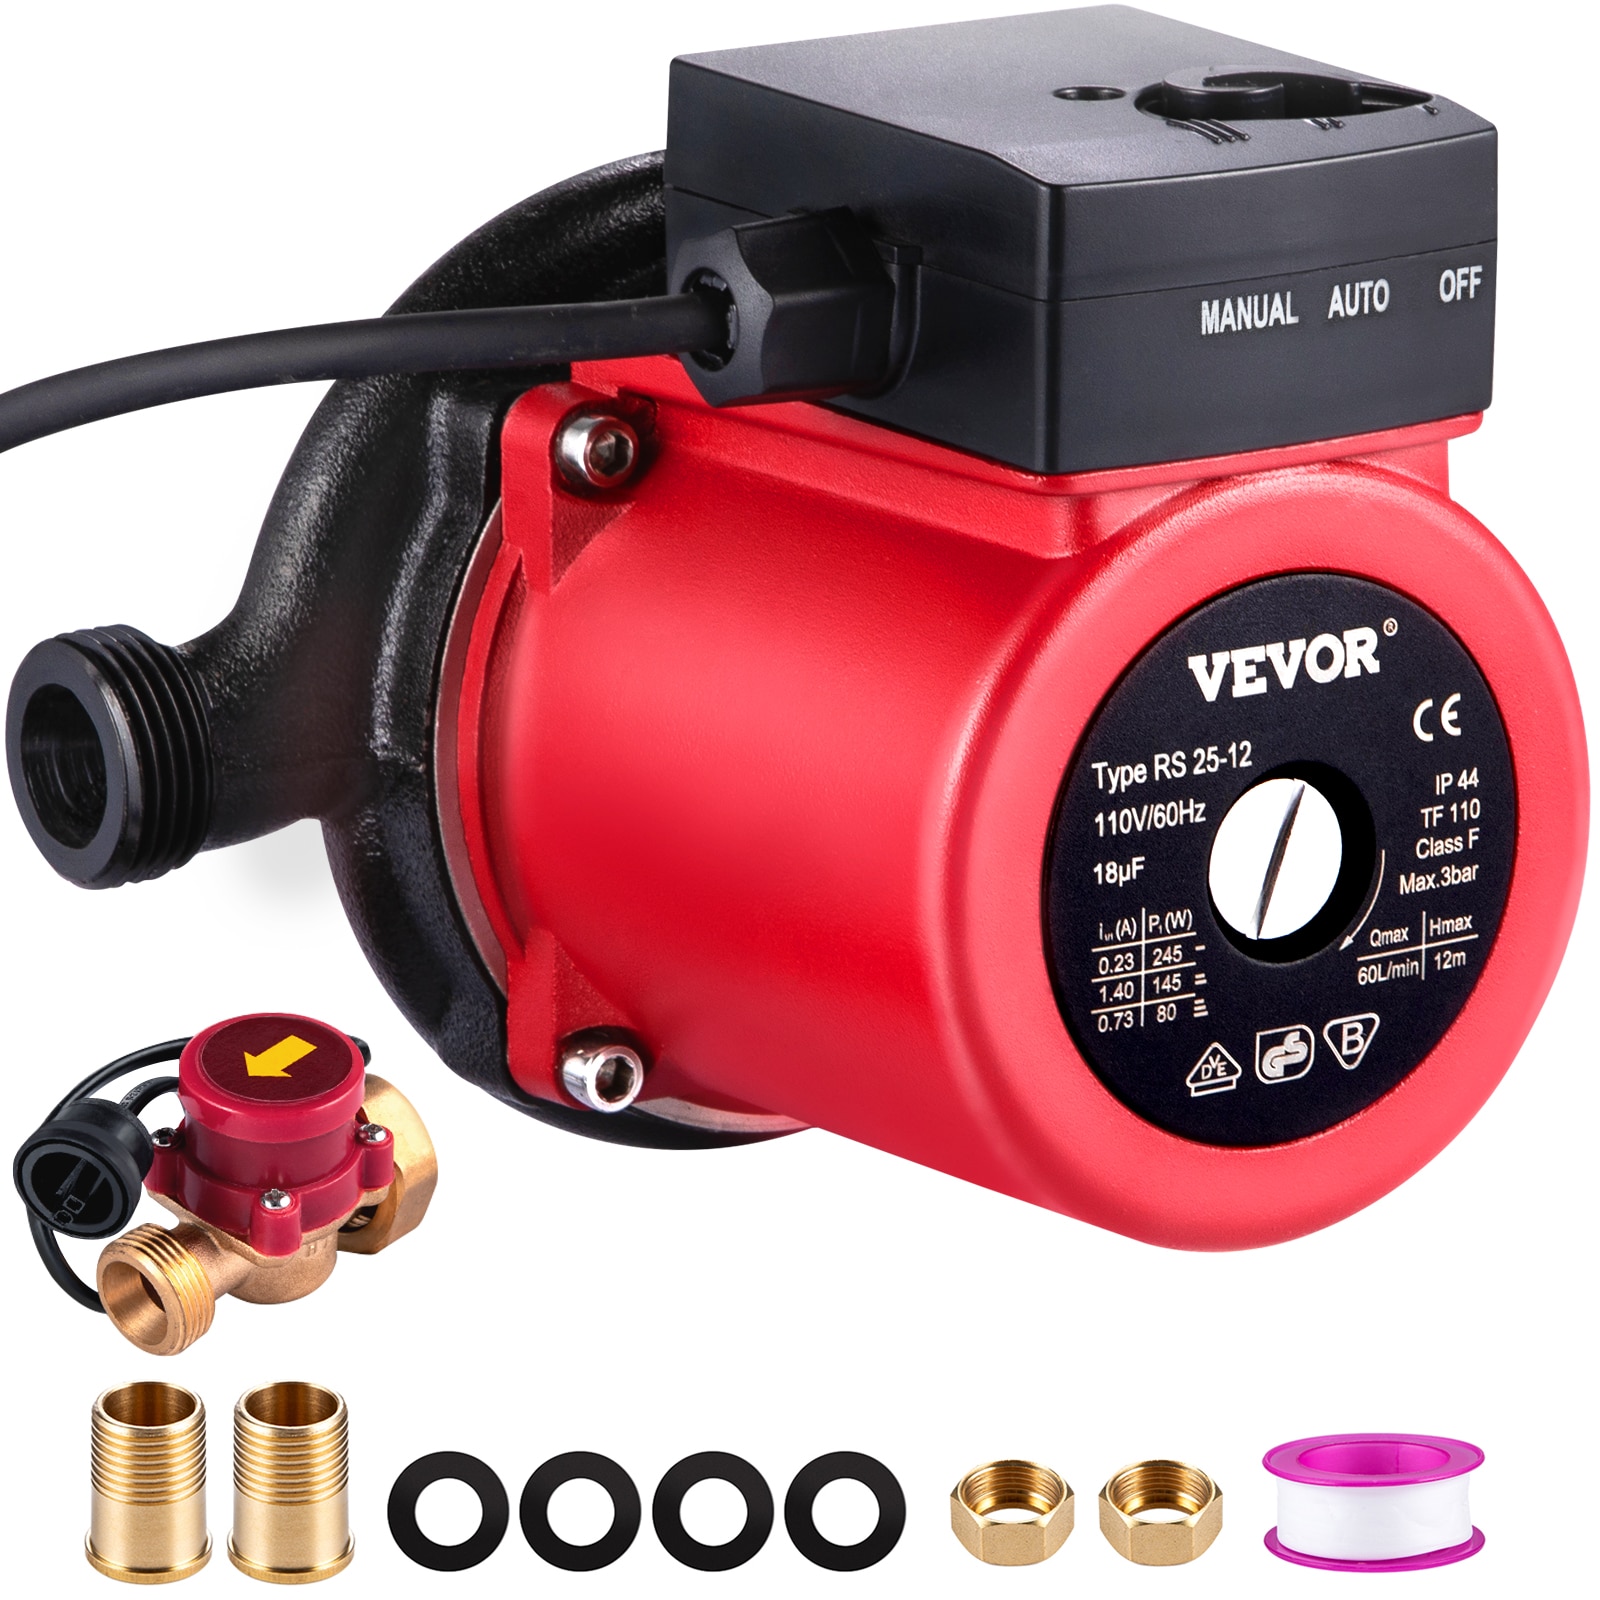 Hot Water Circulation Pumps – How Much Can You Save?